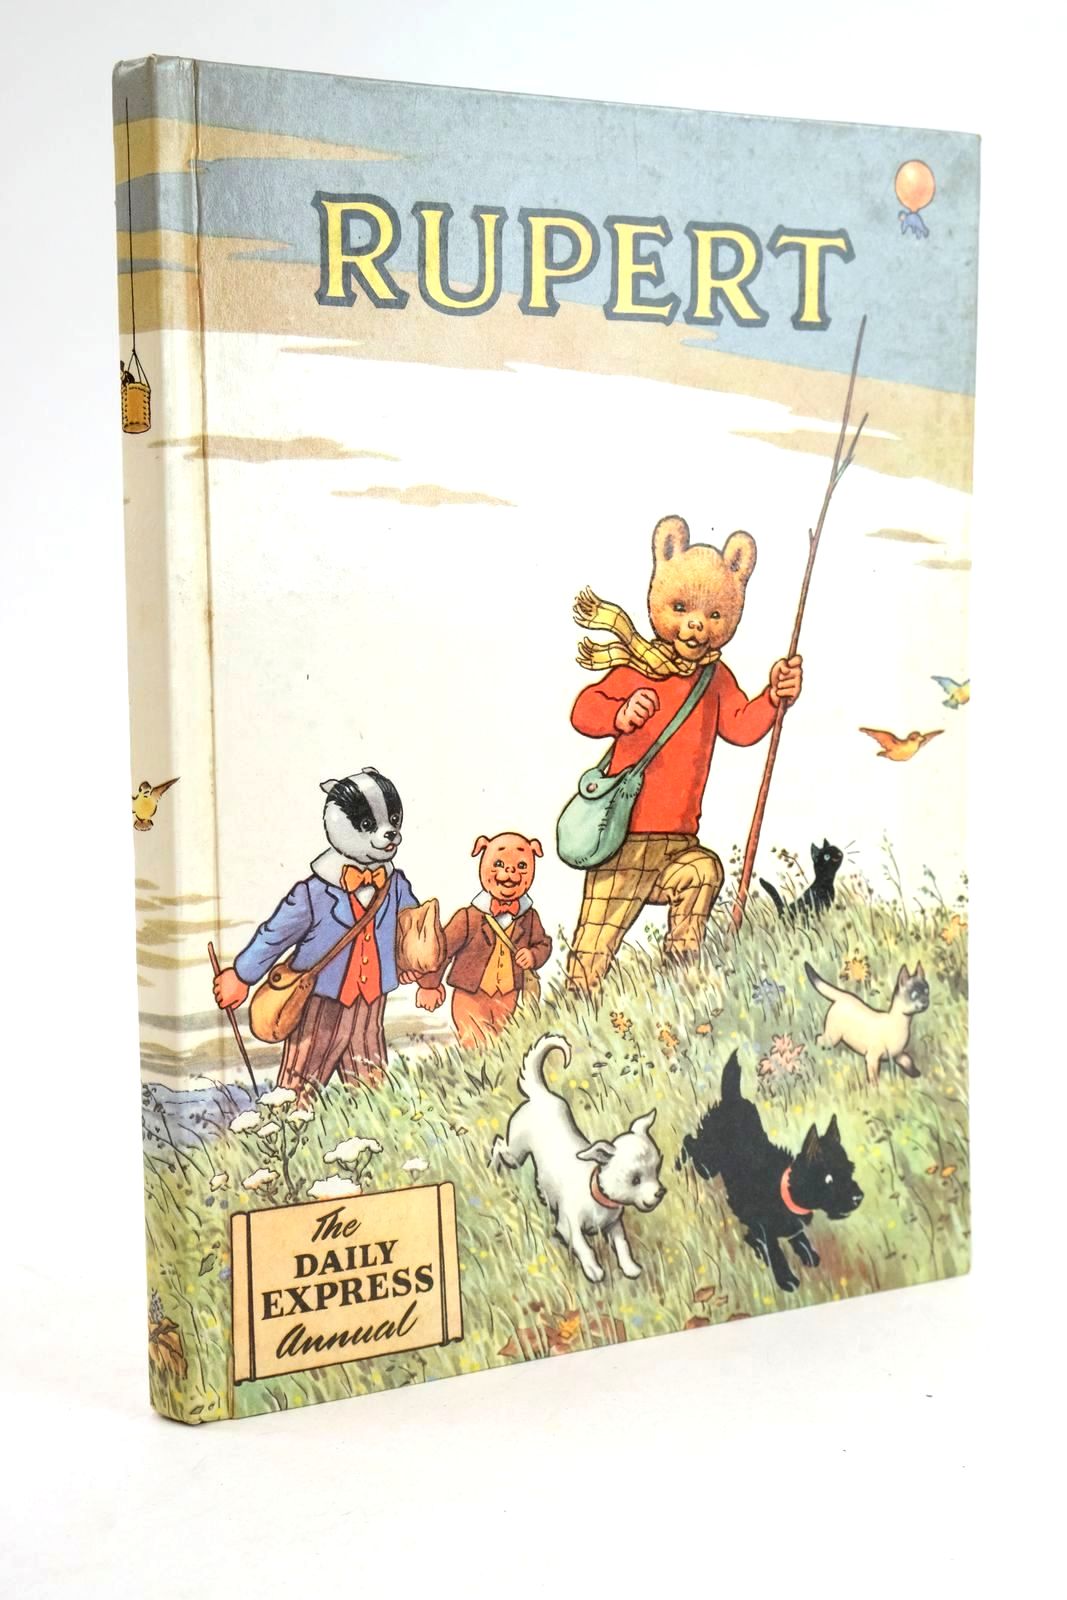 Photo of RUPERT ANNUAL 1955 written by Bestall, Alfred illustrated by Bestall, Alfred published by Daily Express (STOCK CODE: 1324585)  for sale by Stella & Rose's Books